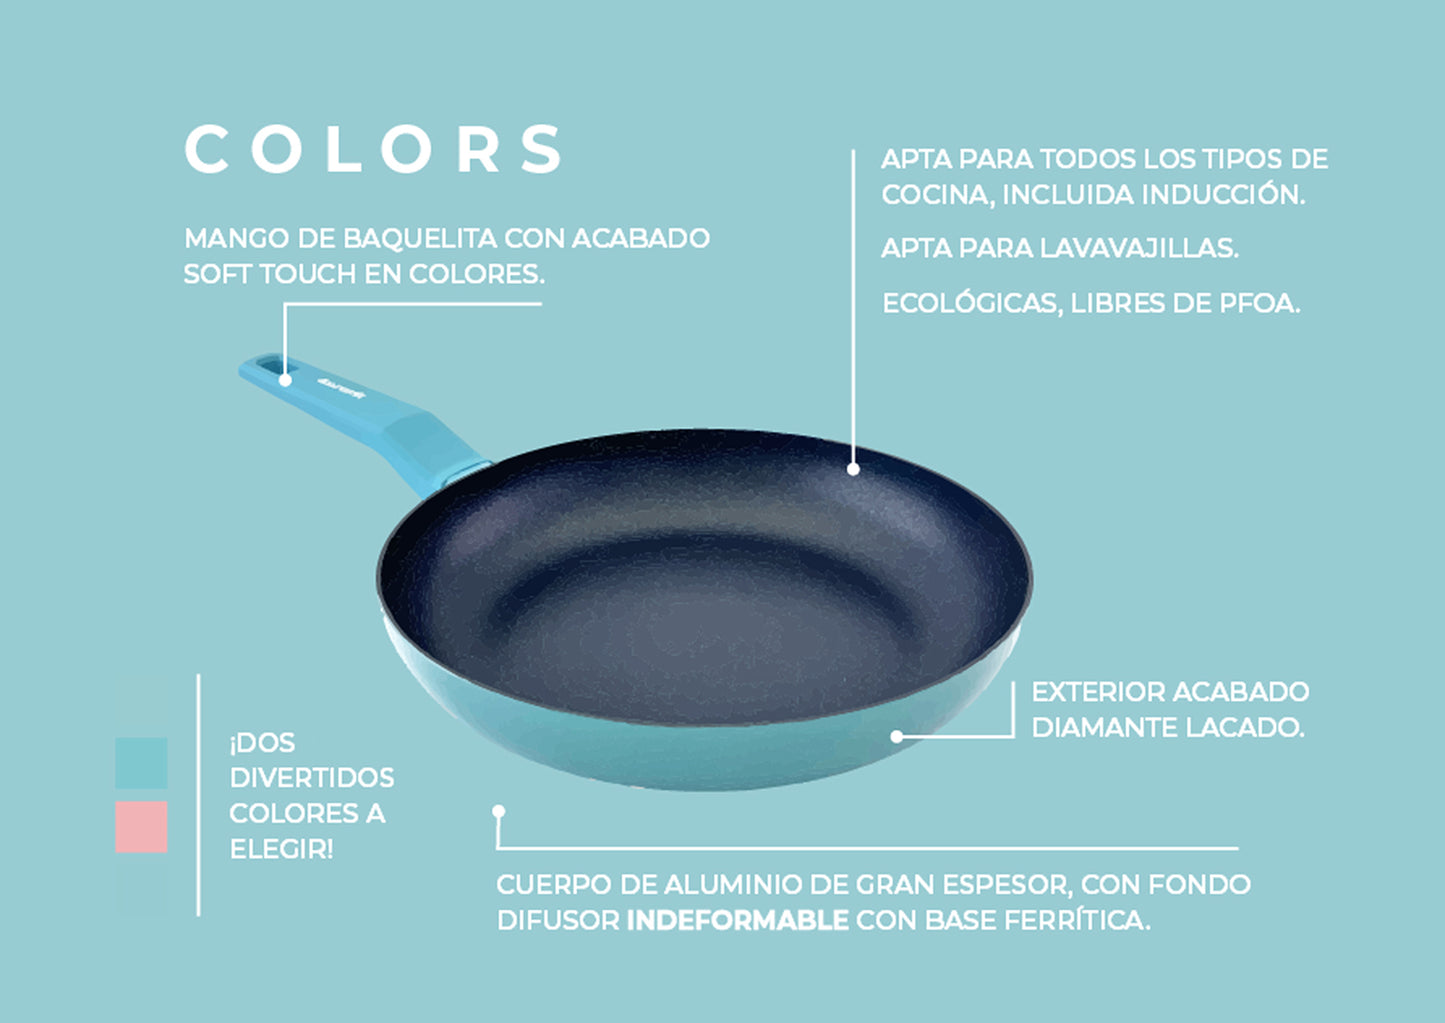 COLORS sky blue saucepan, suitable for all types of cookers, including induction 